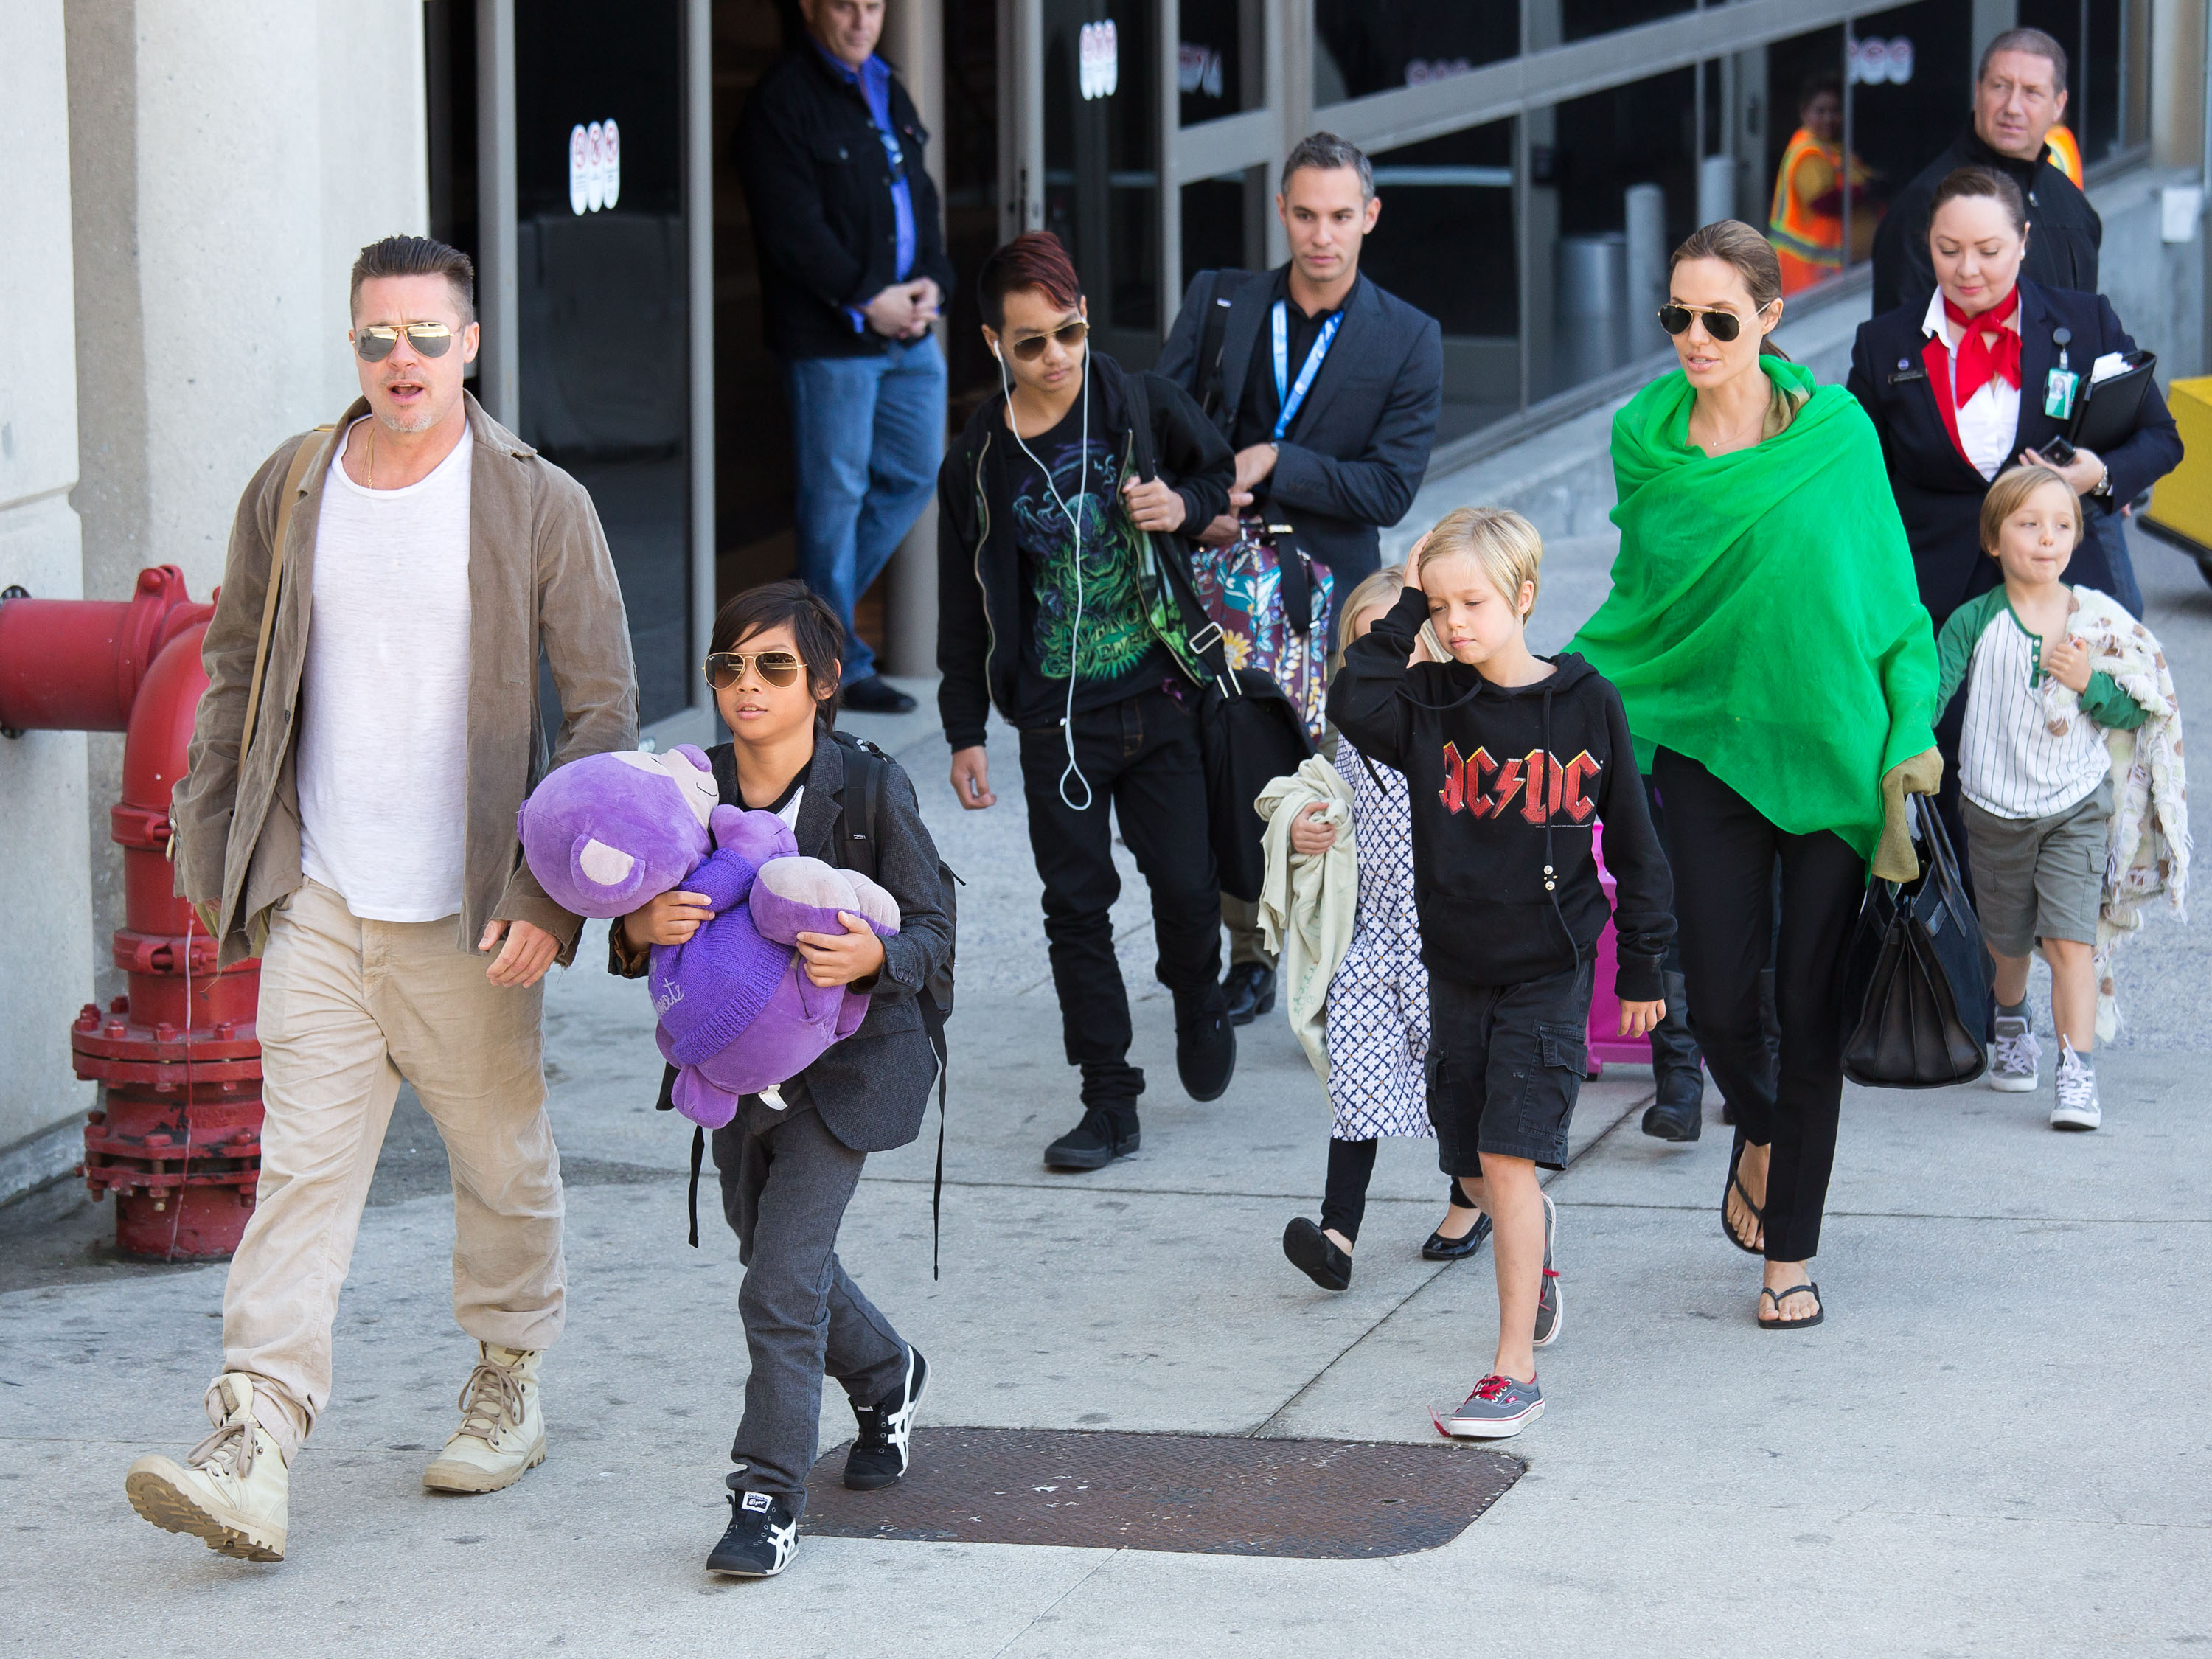 Brad Pitt and Angelina Jolie seen at Los Angeles International Airport with their children, Pax, Maddox, Shiloh, Vivienne and Knox Jolie-Pitt in Los Angeles, California on February 05, 2014 | Source: Getty Images